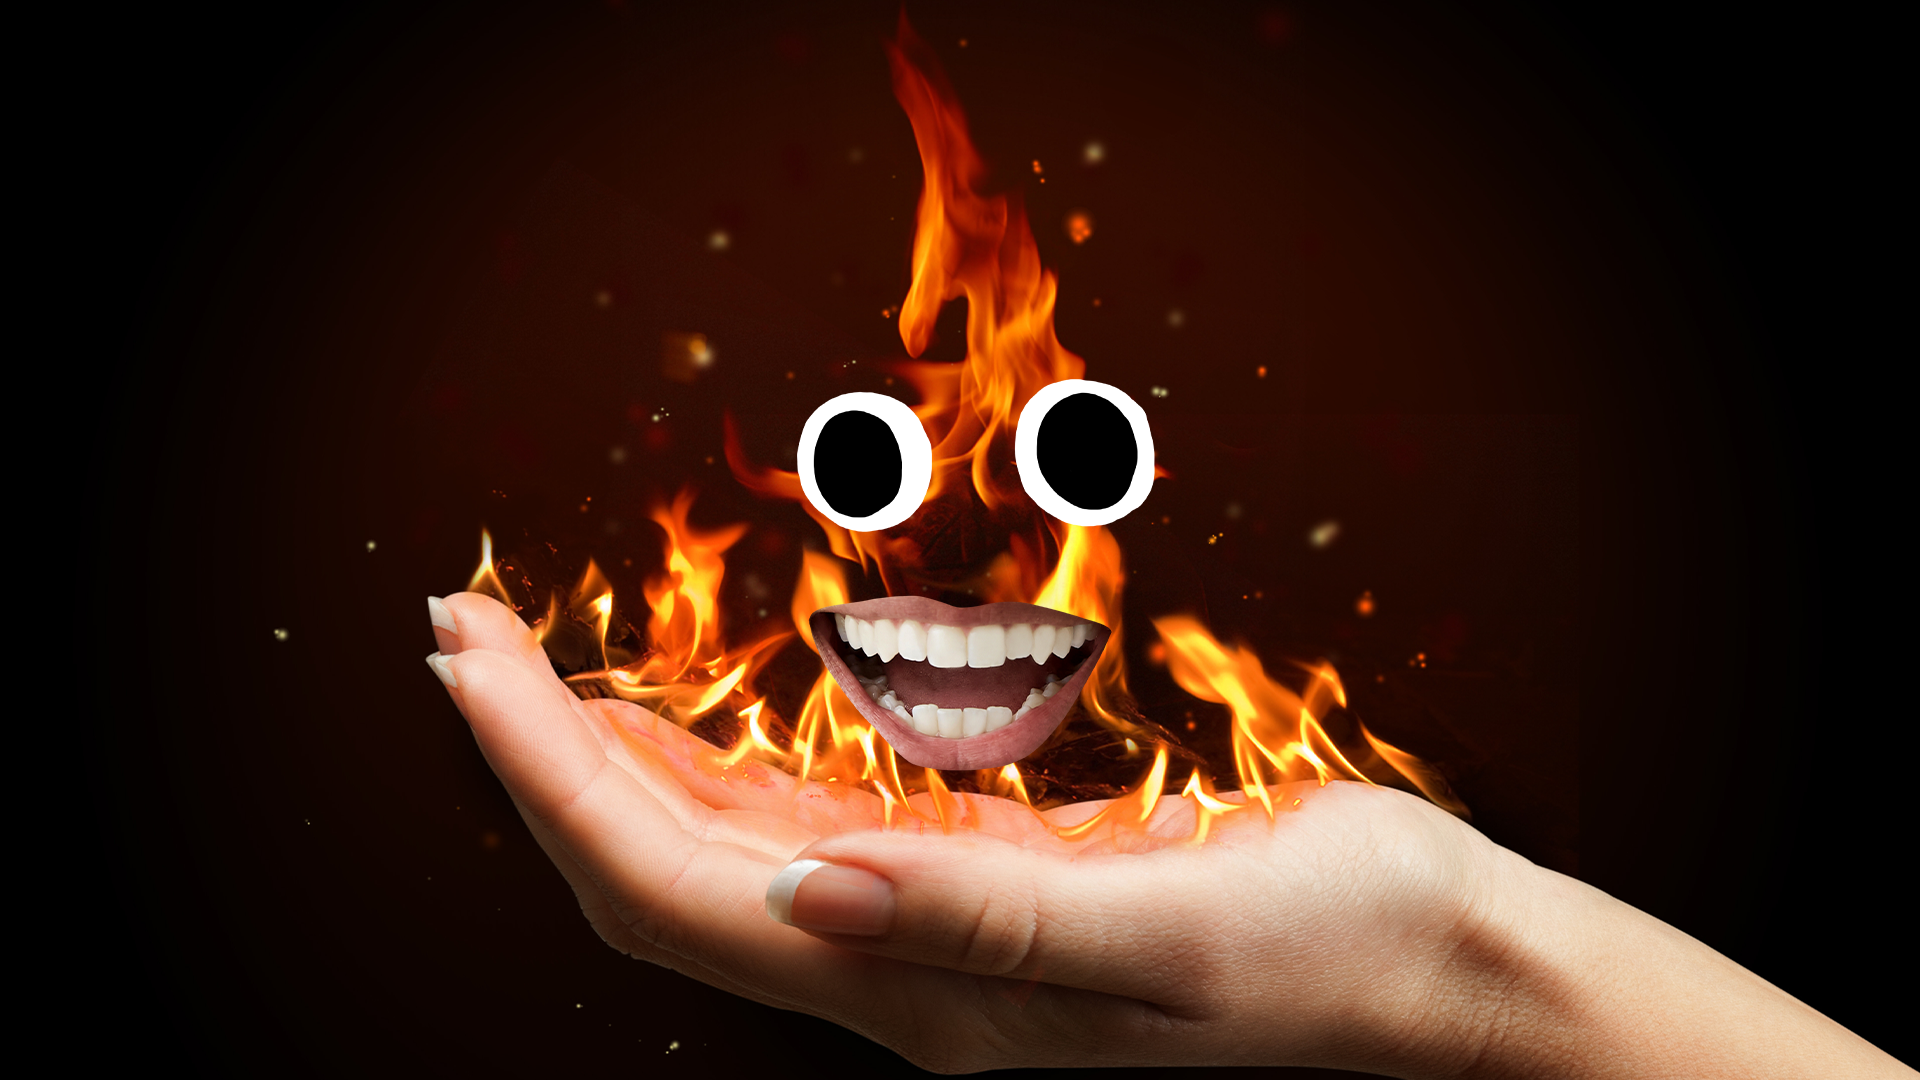 Fire with face in someone's hand